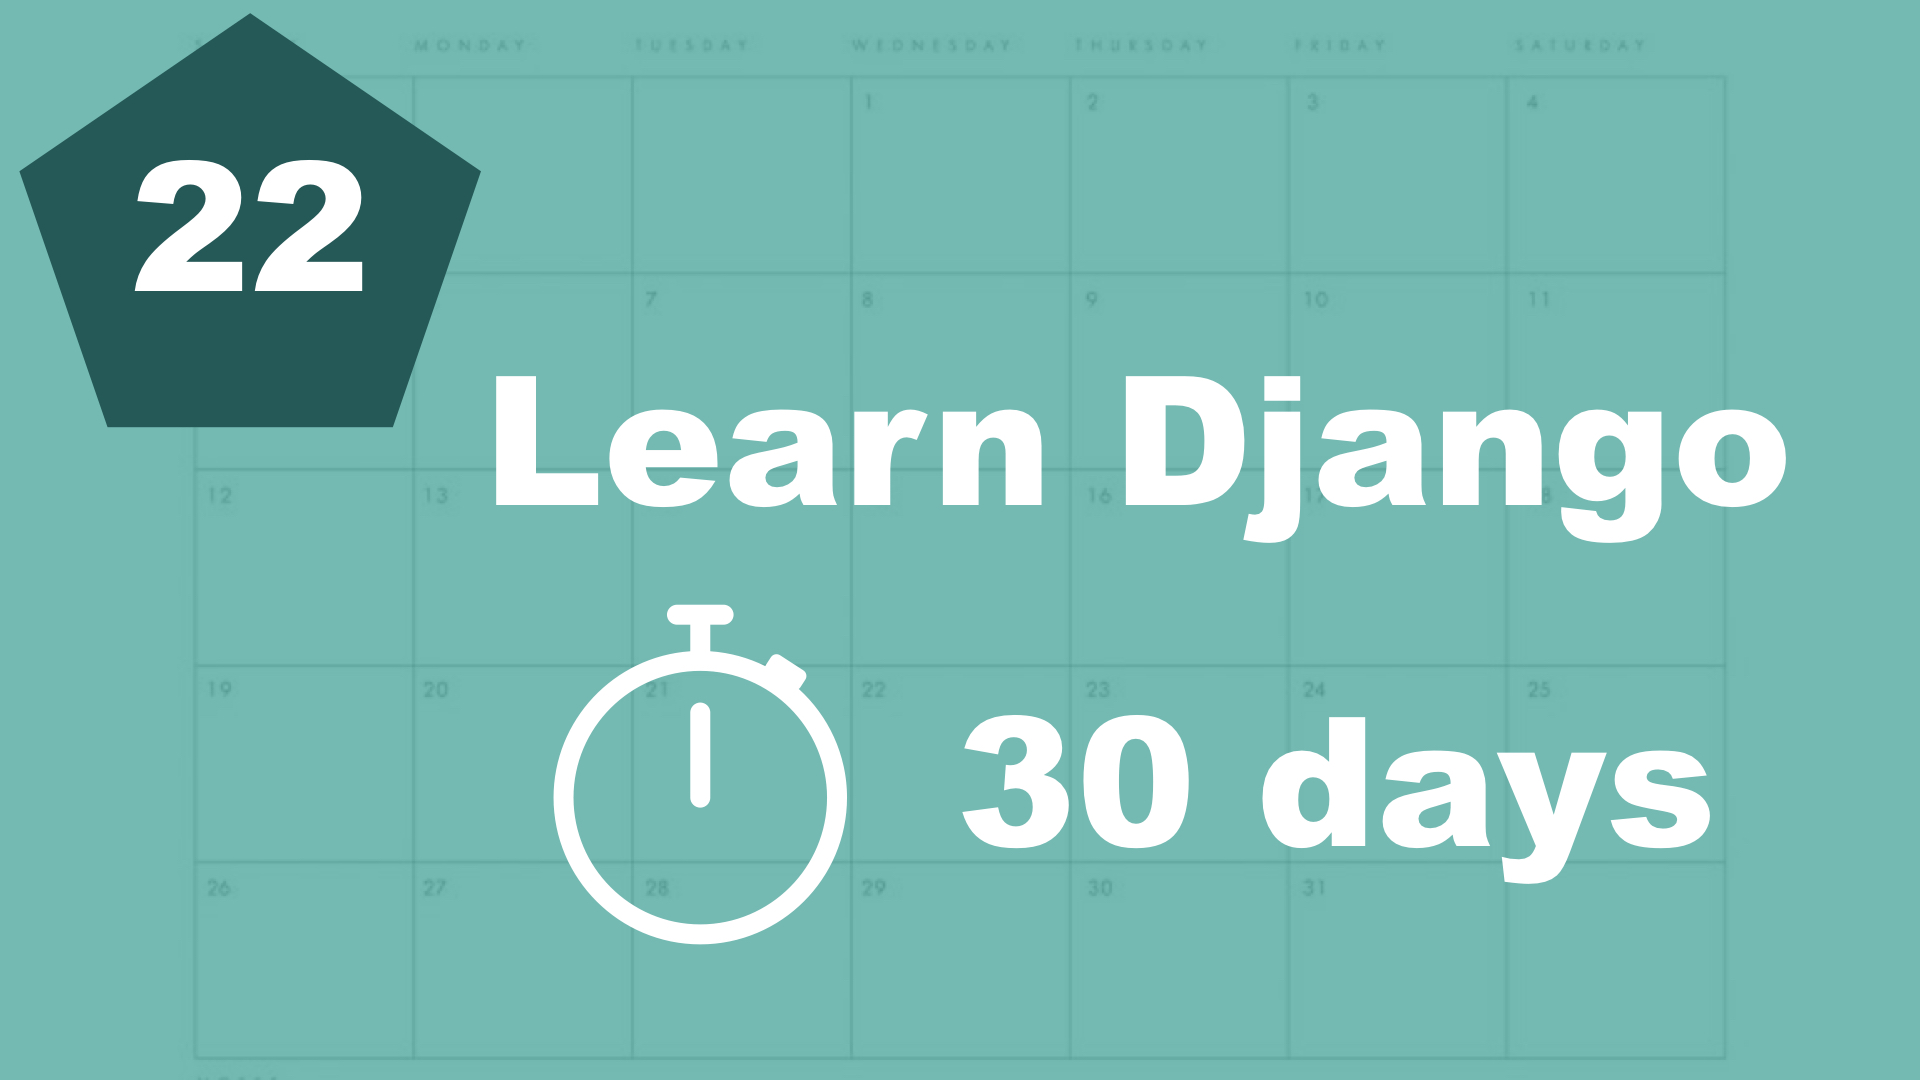 Make it possible to sign up - 30 days of Django